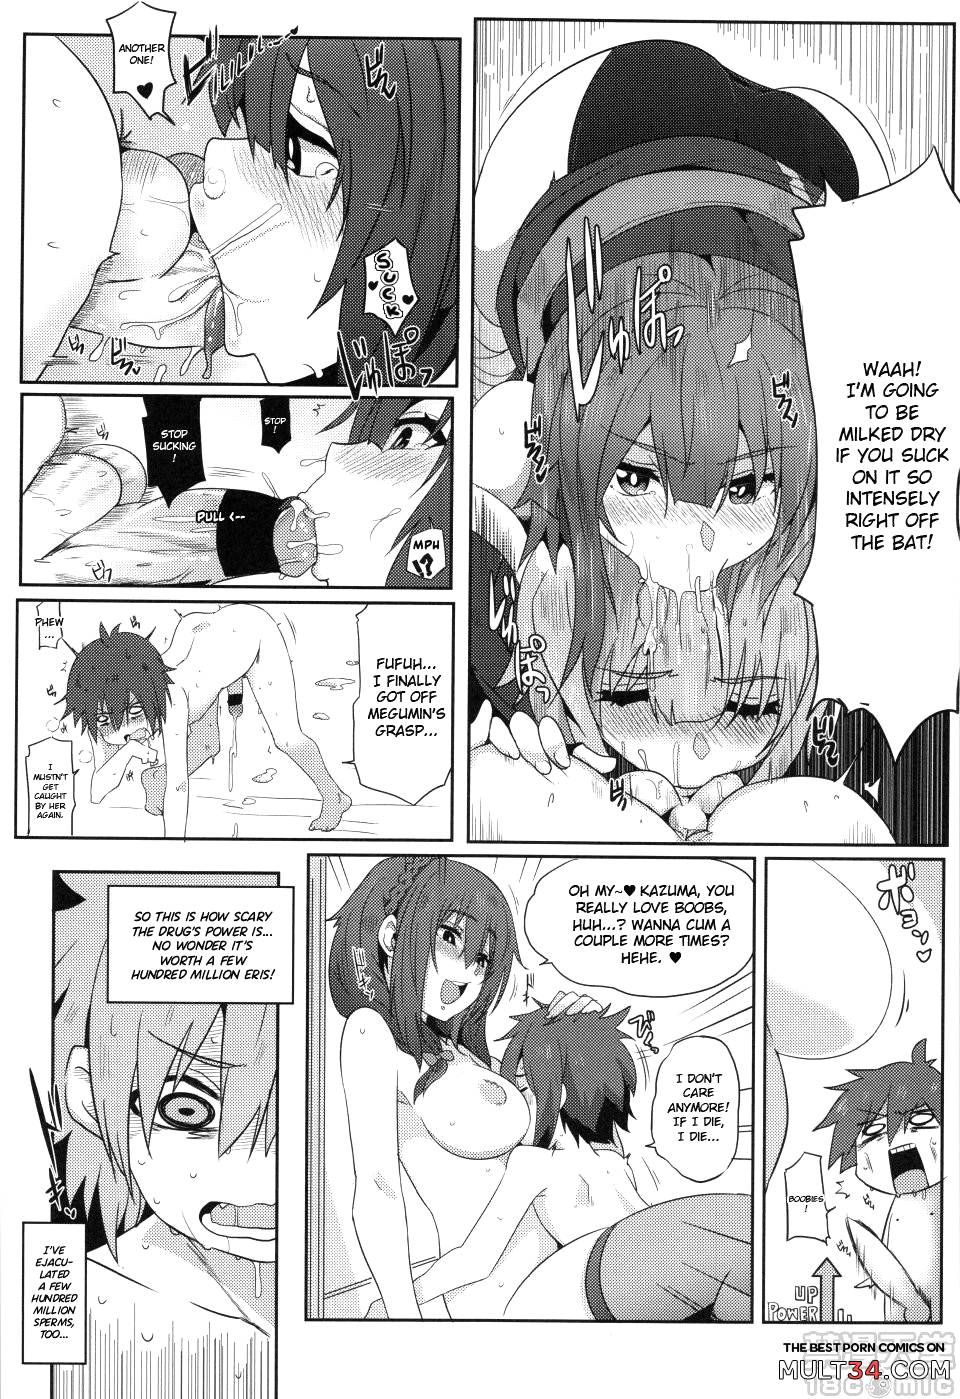 Blessing Megumin with a Magnificence Explosion! 2 page 16